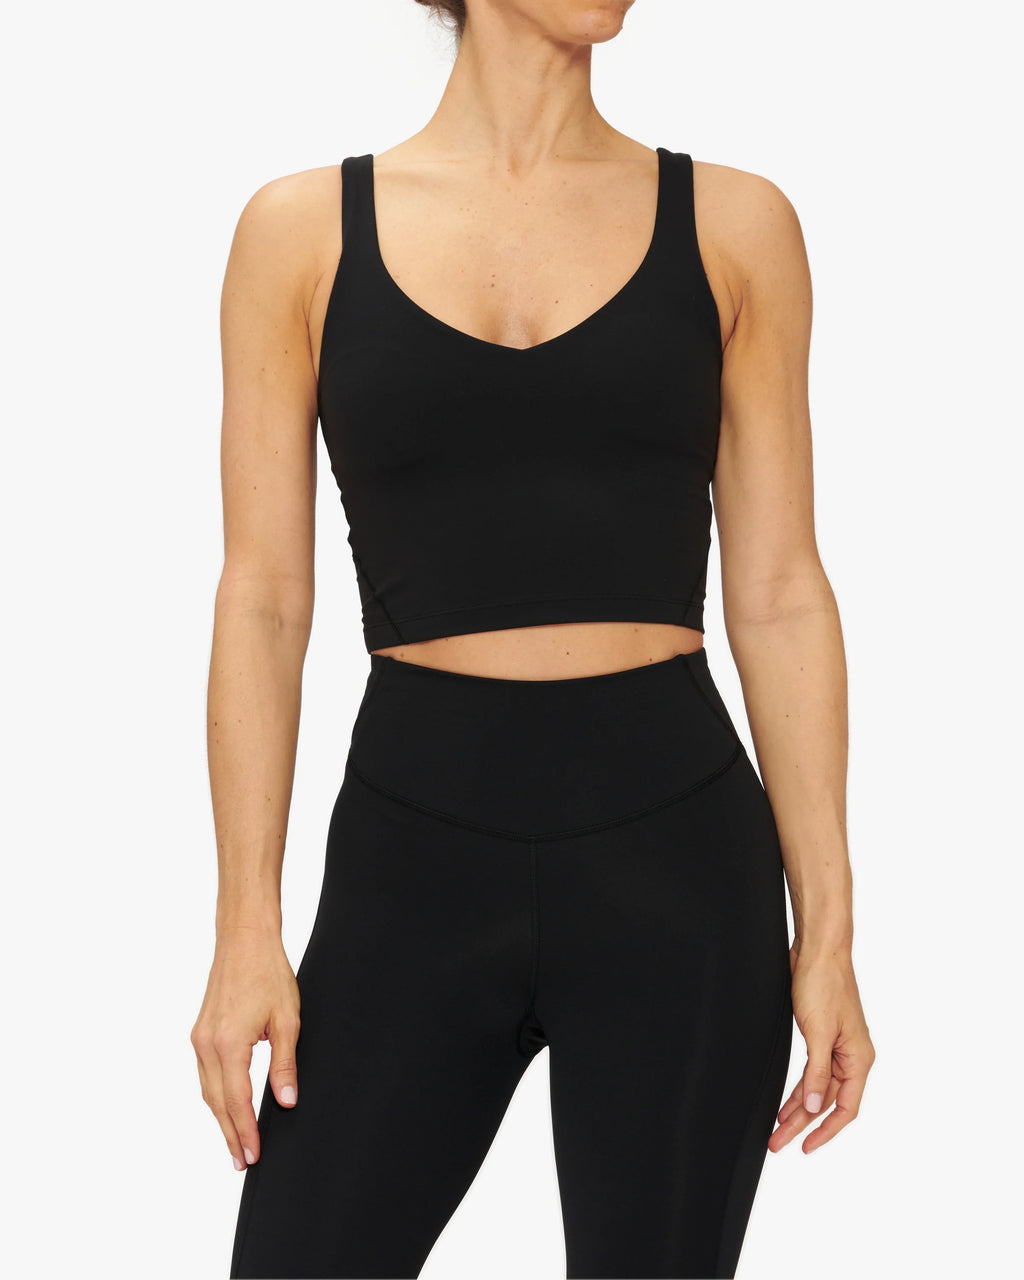 Does this have a built in shelf bra like the align cropped tank